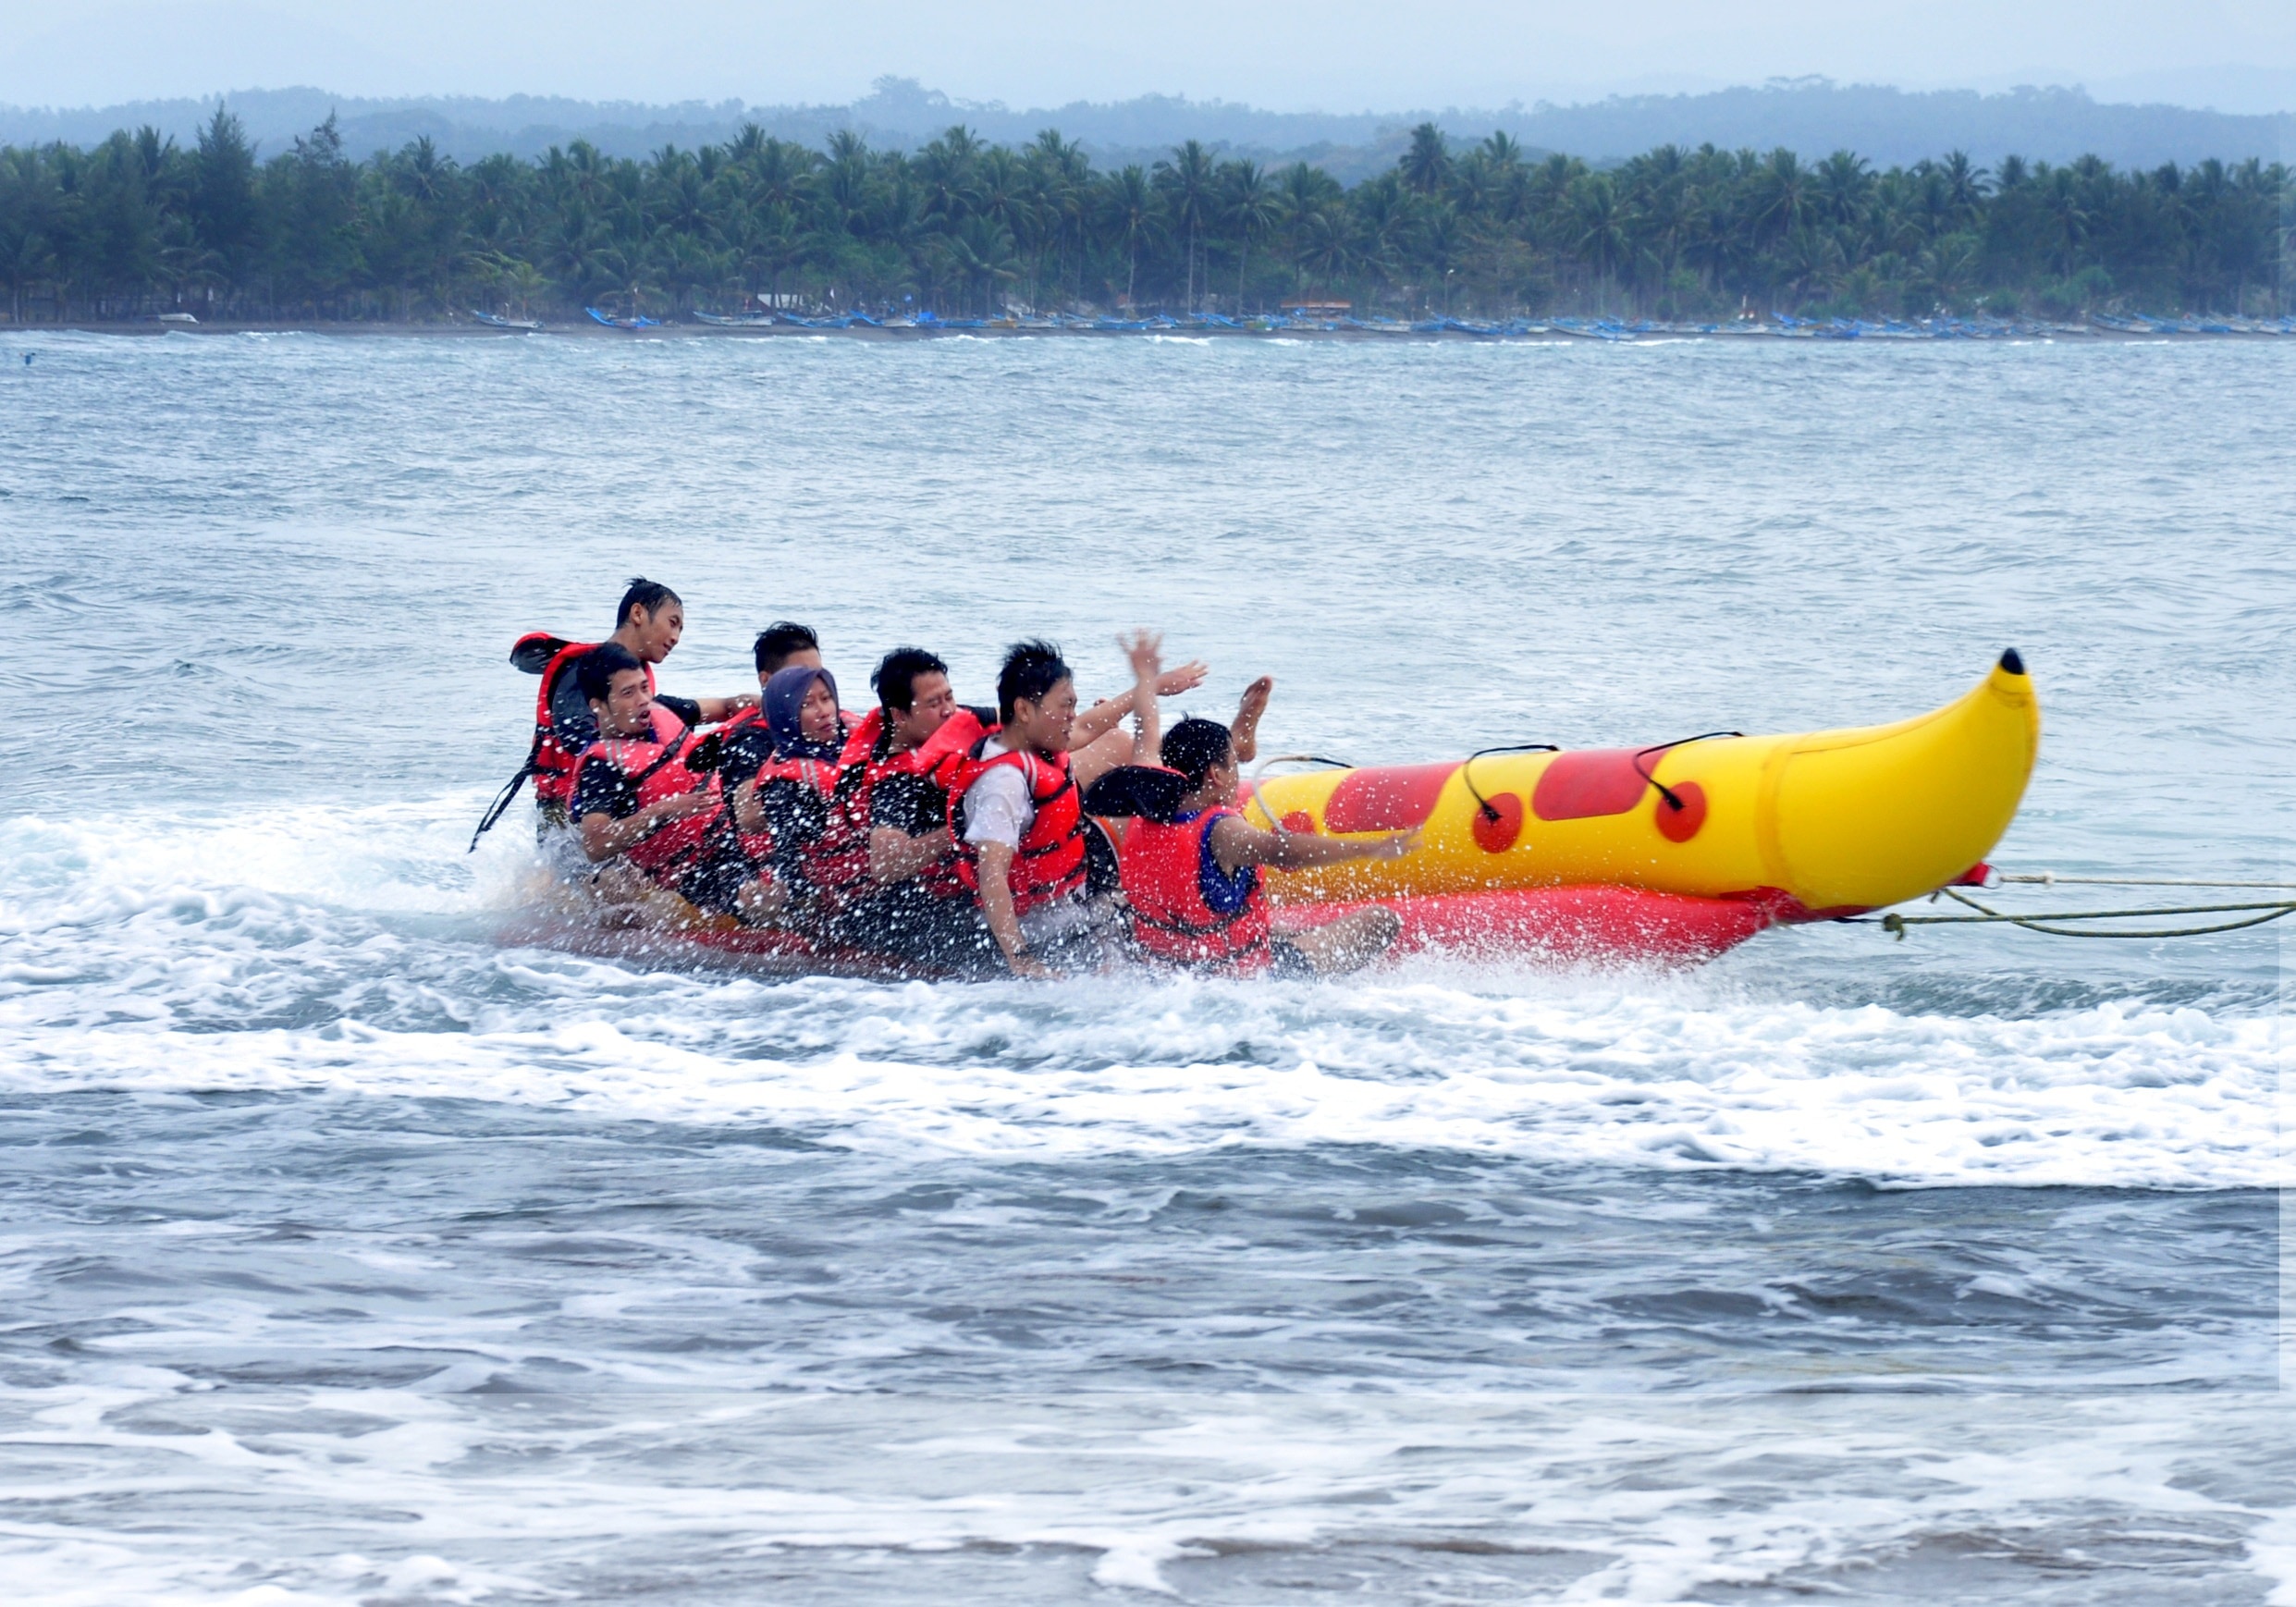 people riding on banana boat during daytime